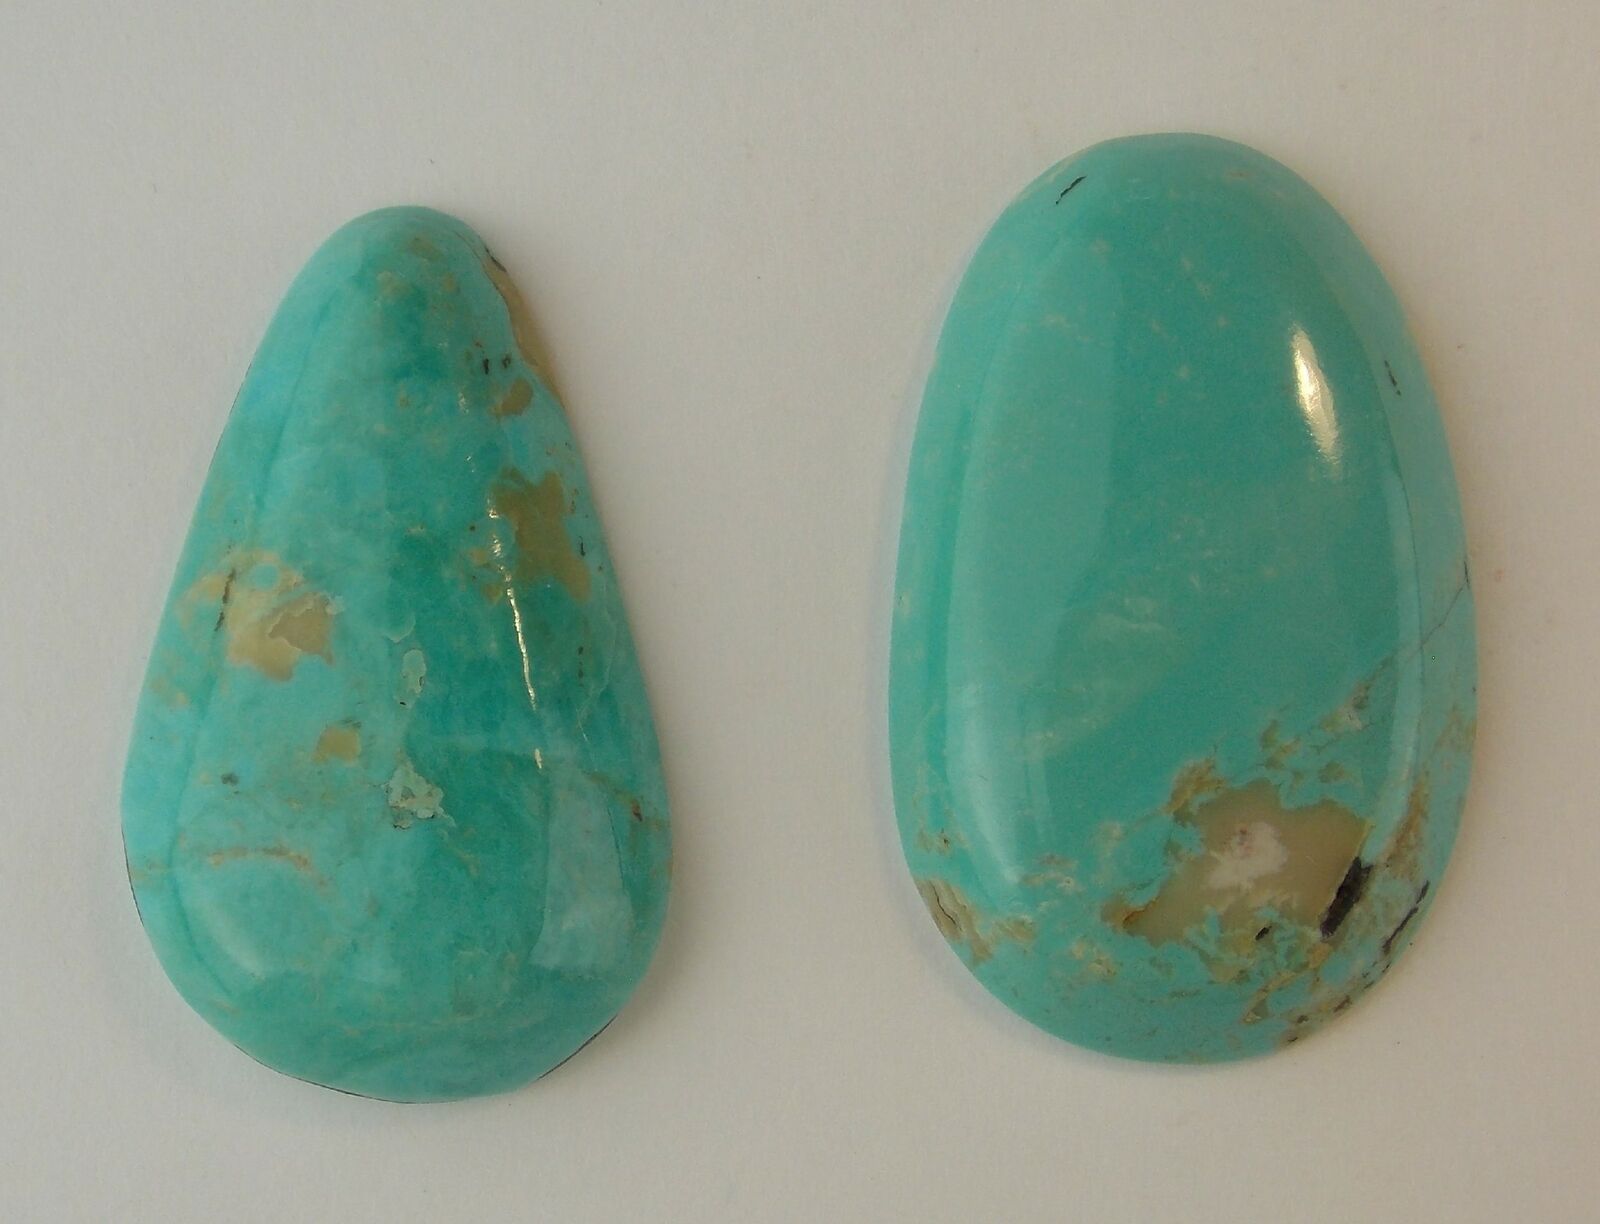 TYRONE TURQUOISE - Lot of 2 - 41 carats / 31 mm - TYRONE MINE, NEW MEXICO 25755 Unbranded